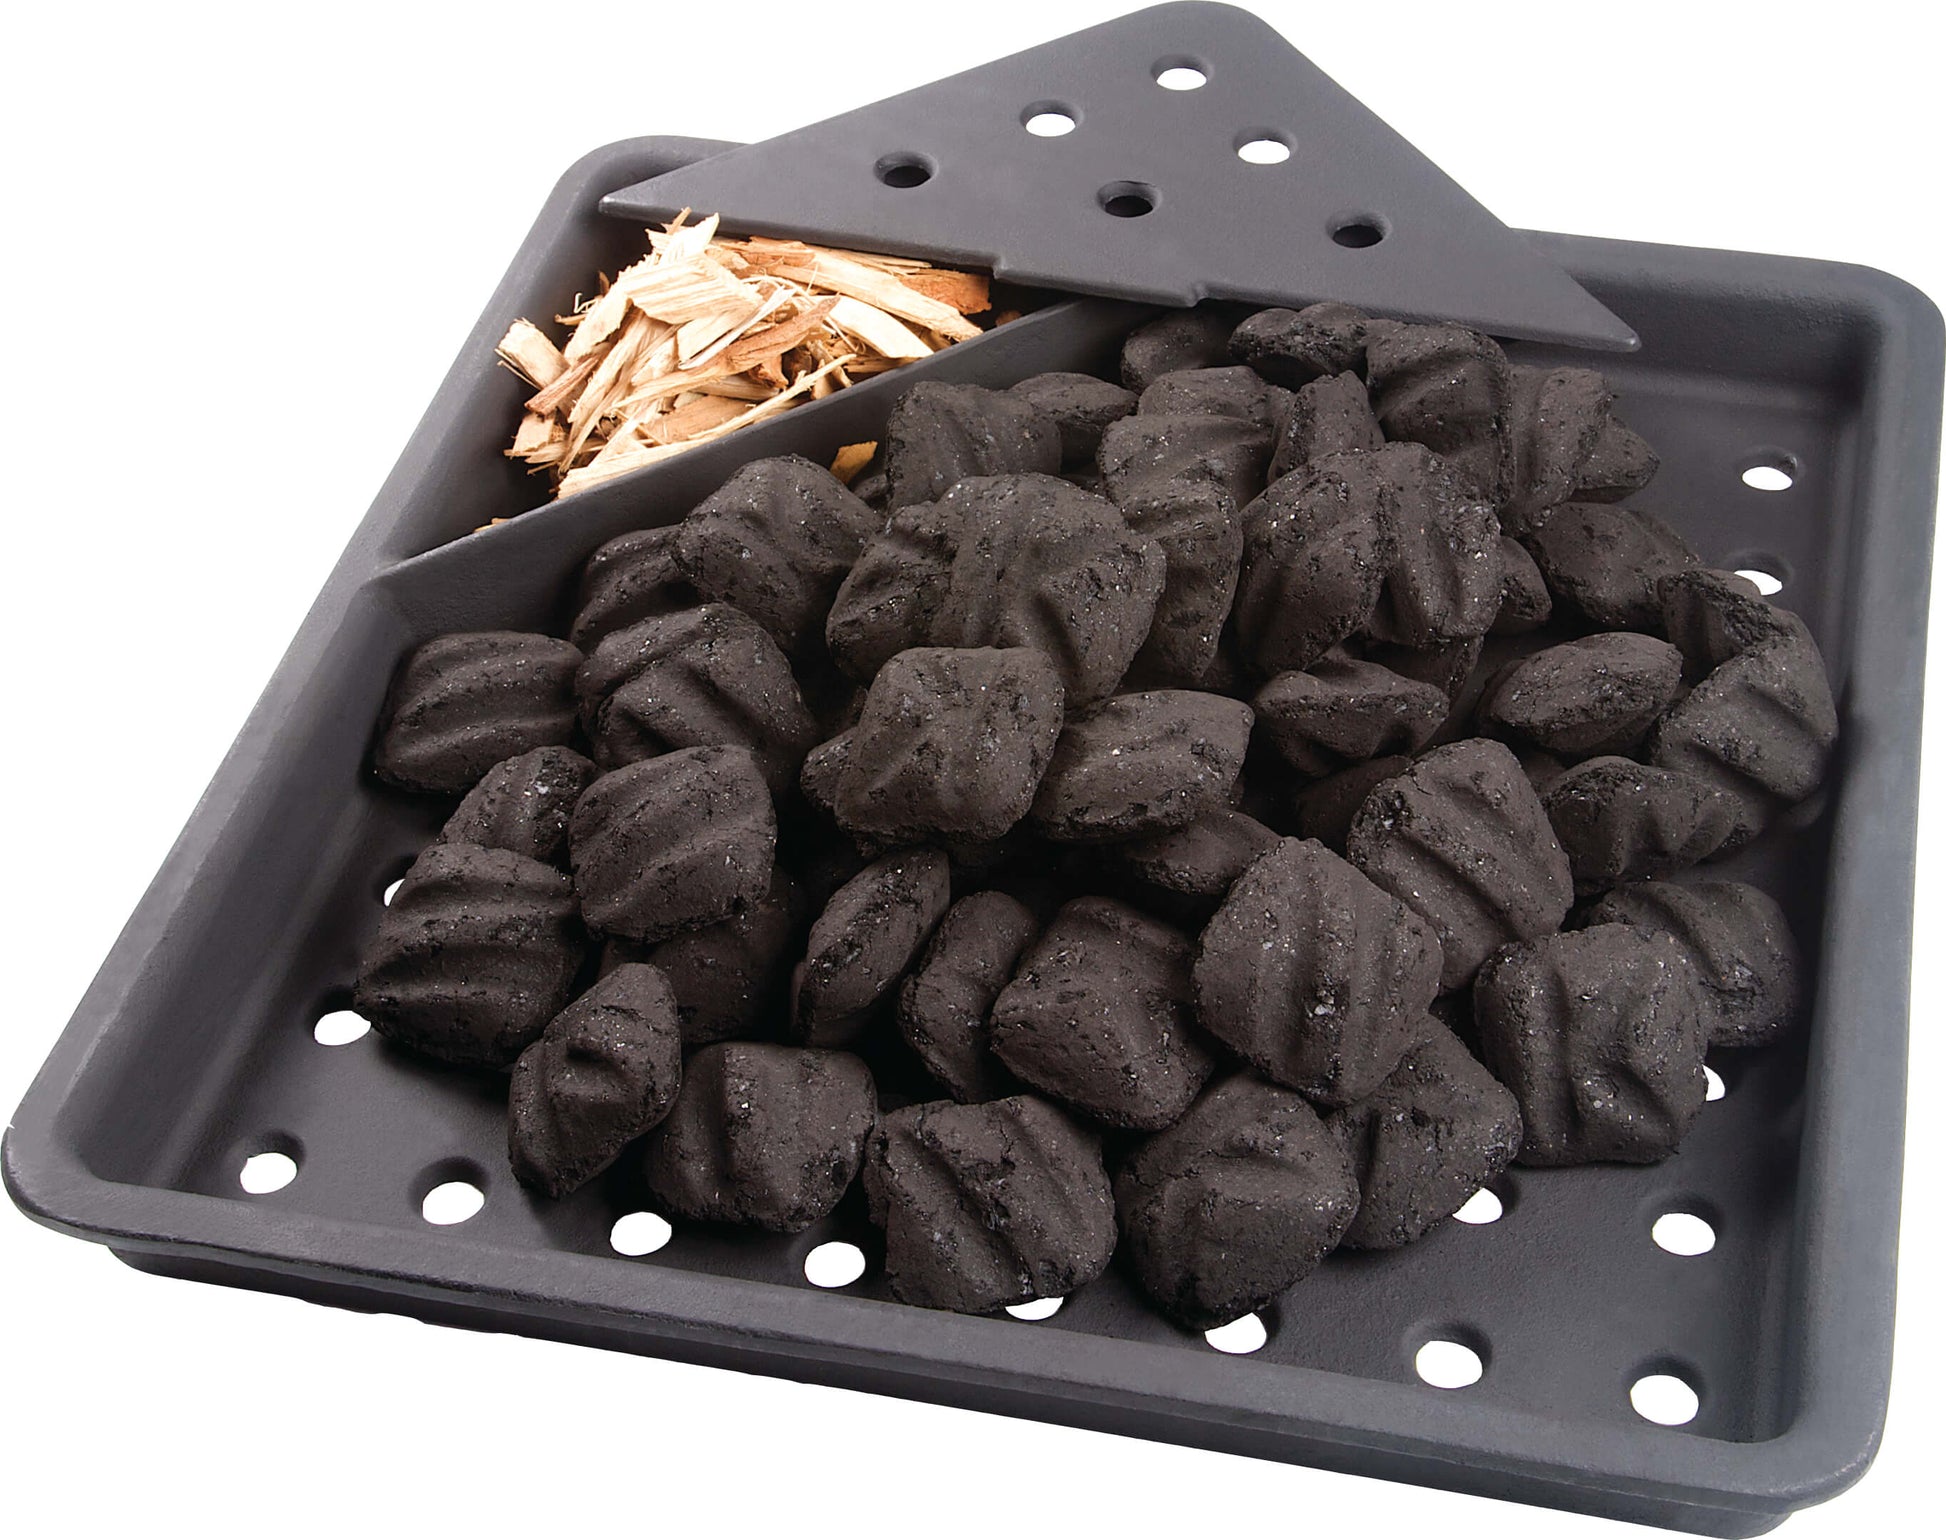 charcoal in tray with kindling to start